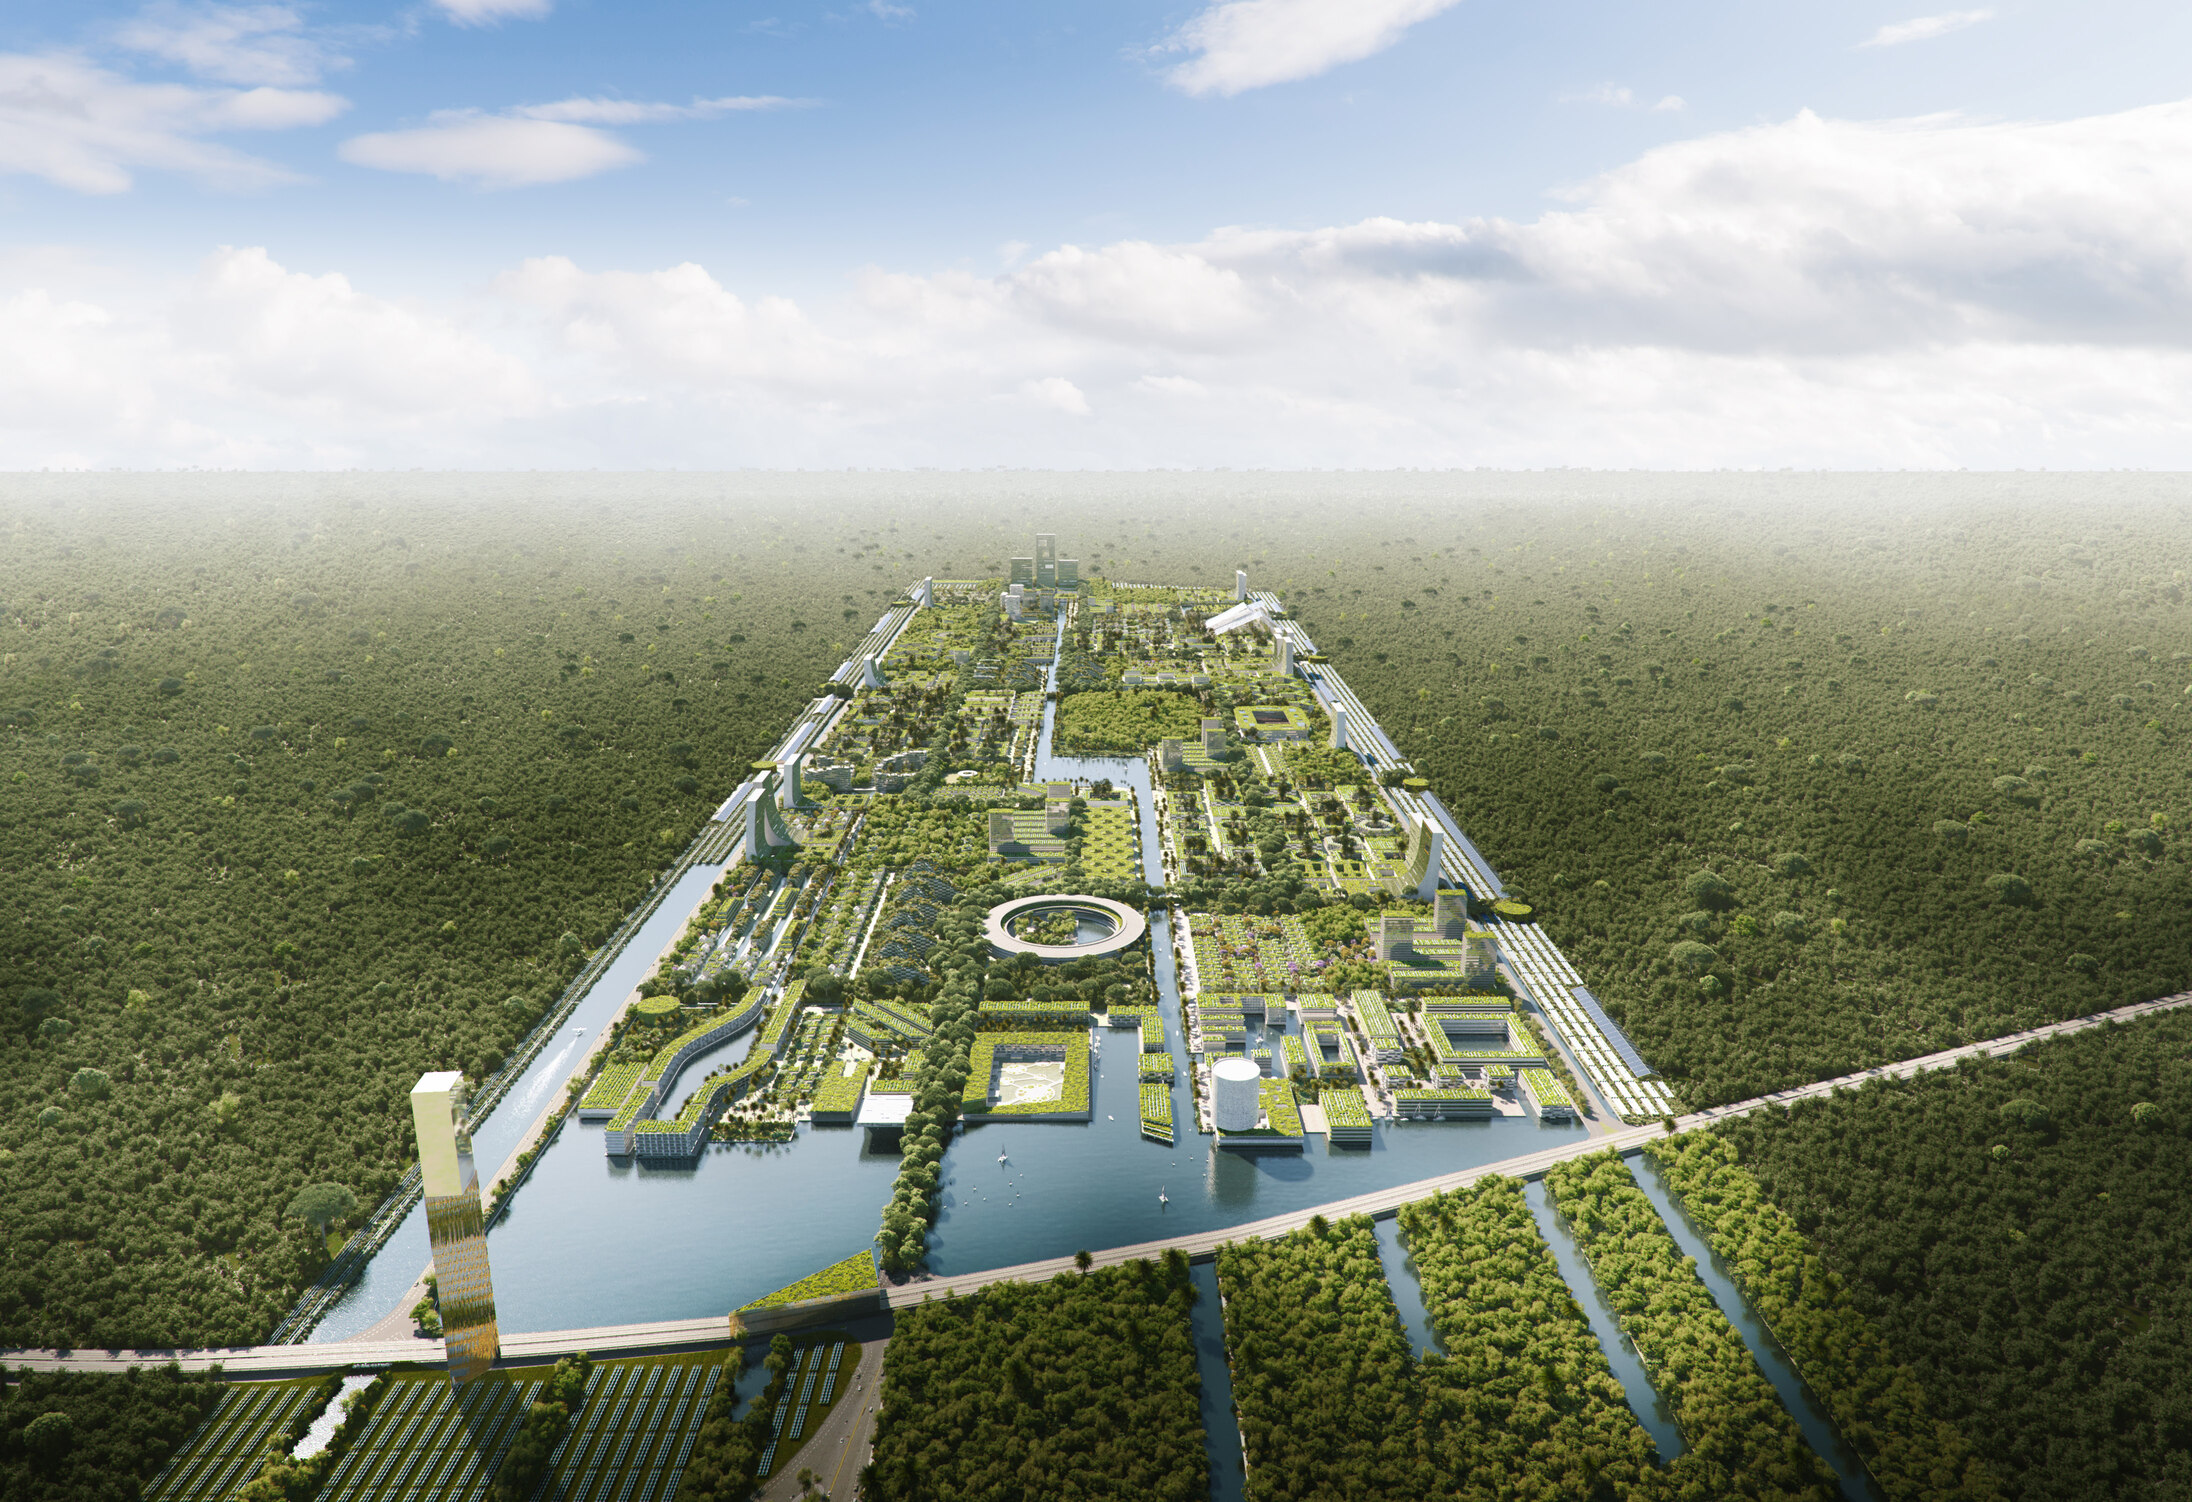 Cities of the Future：Smart Forest City 智慧未來城市 - 森林裡的智慧綠能城市